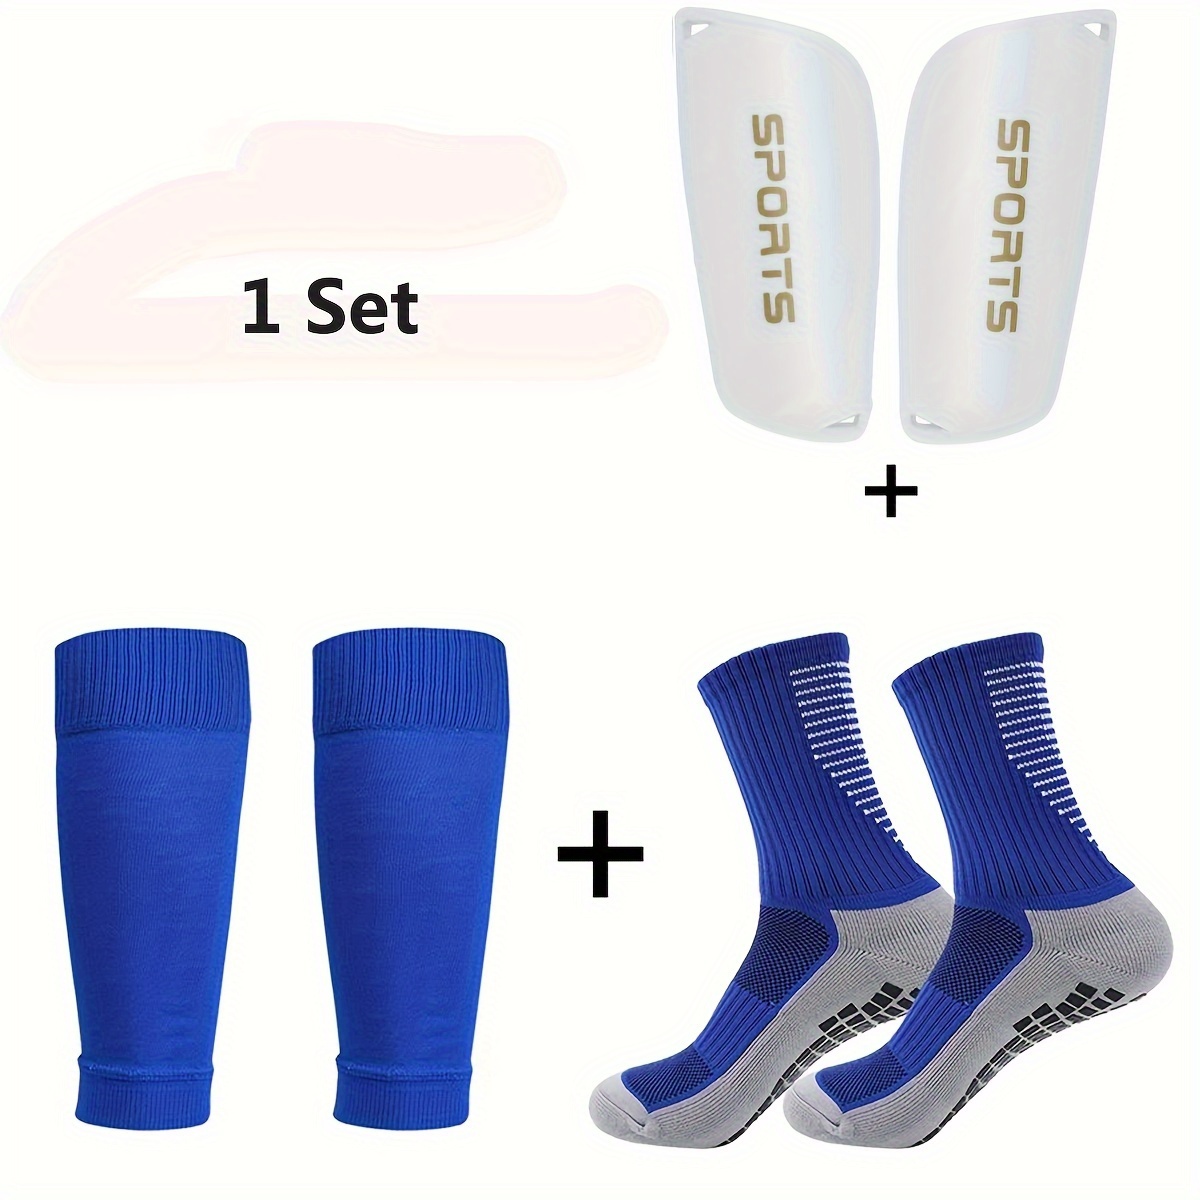 

1 Set Of 3pcs Adult Soccer Gear Kit, Non-slip Rubberized Football Socks, Professional Athletic Socks, Leg Sleeves With Knee Pads & Shin Guards Perfect For Soccer Sports